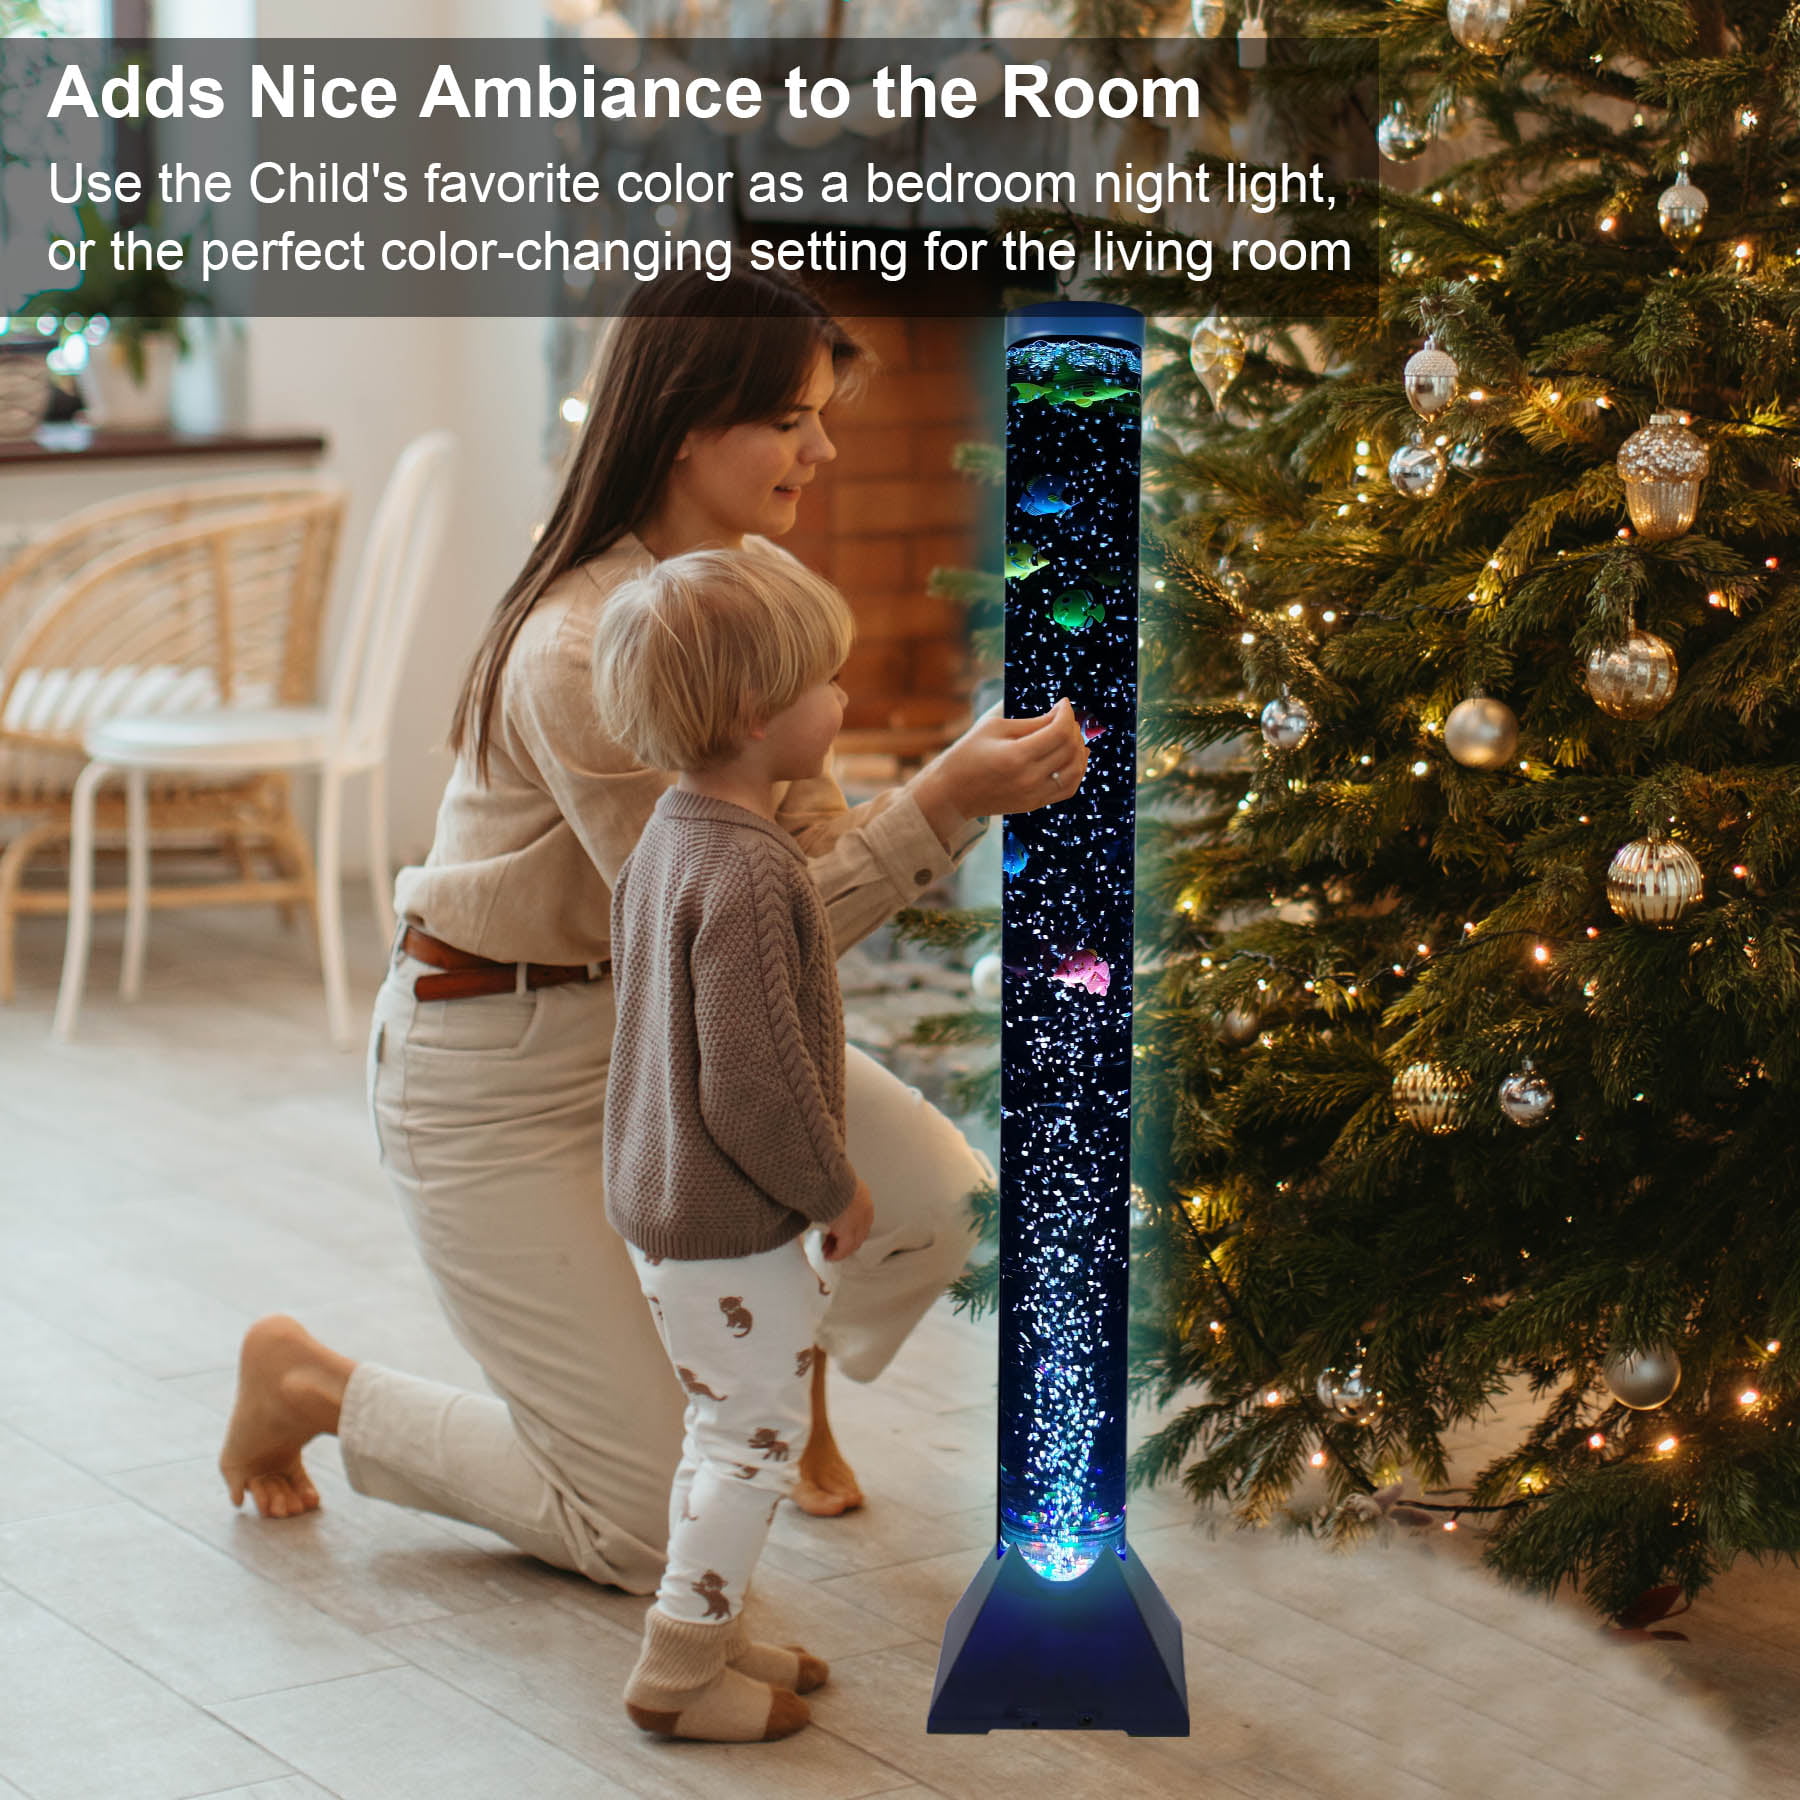 4FT LED Bubble Tube Floor Lamp Extra Large Aquarium Lamp with 10 Fish and Remote Control 20 Light Changes Tall Water Tower Tank Night Light for Bedroom Office Gift for Kids Men Women 